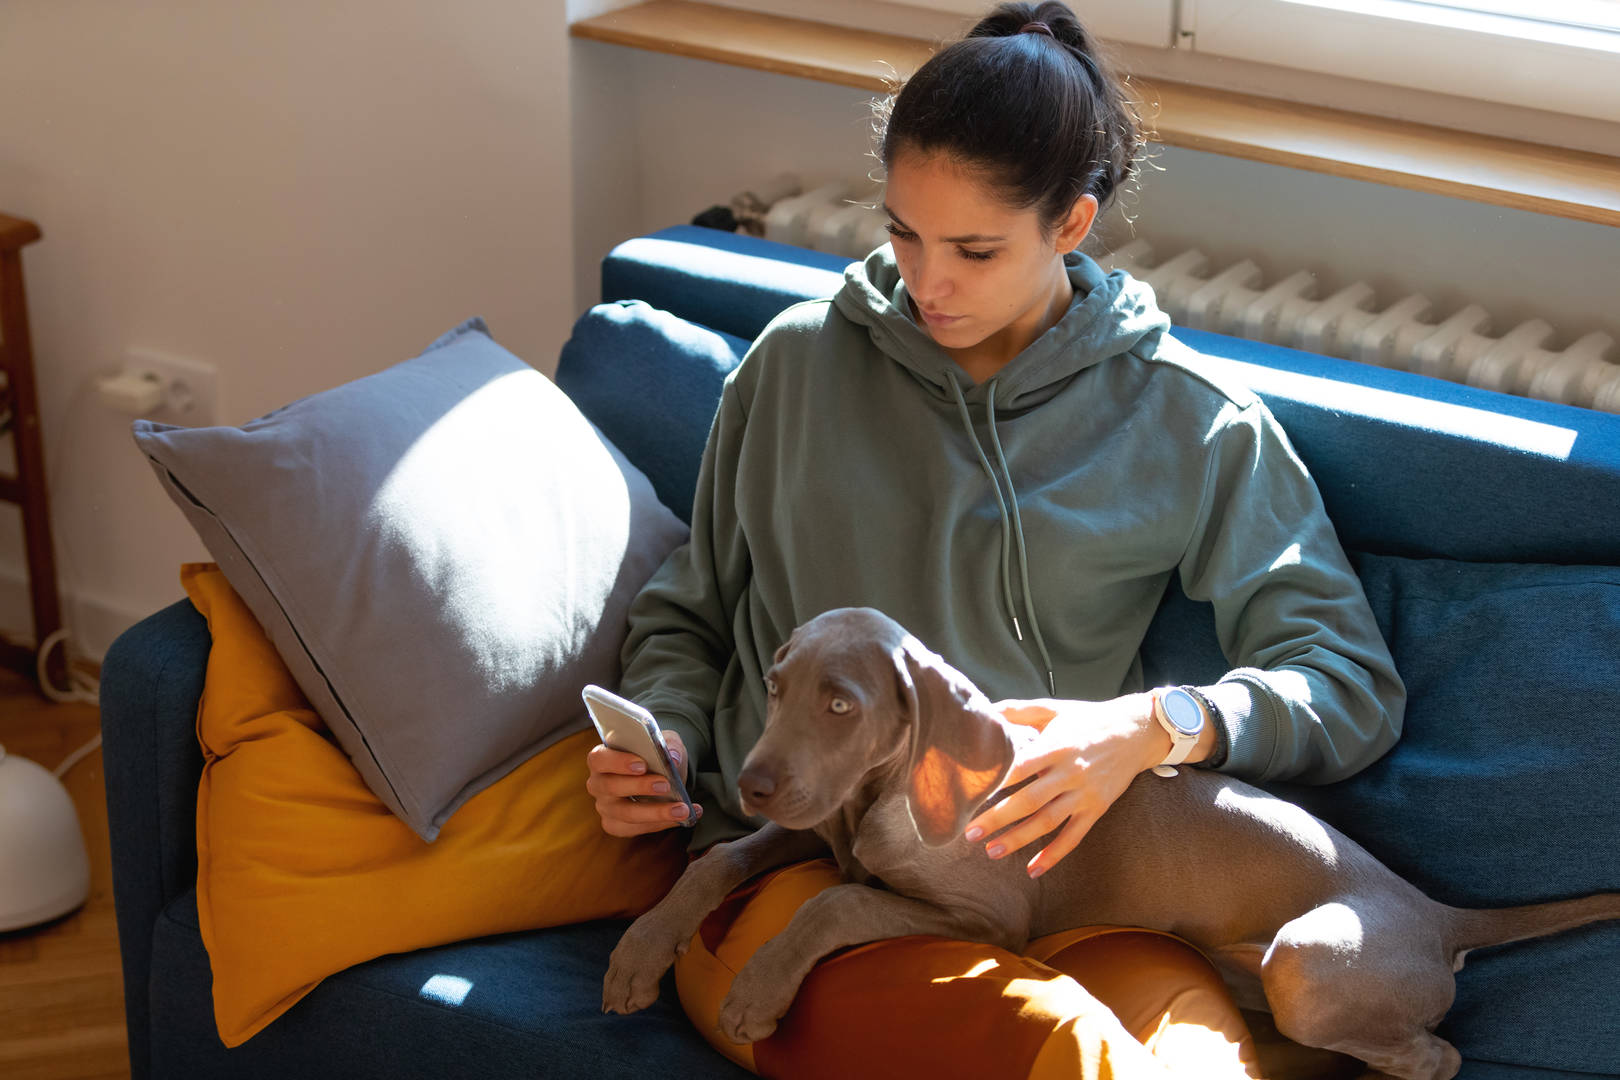 Young woman with brown hair sits on couch while petting dog and looking at smart phone.